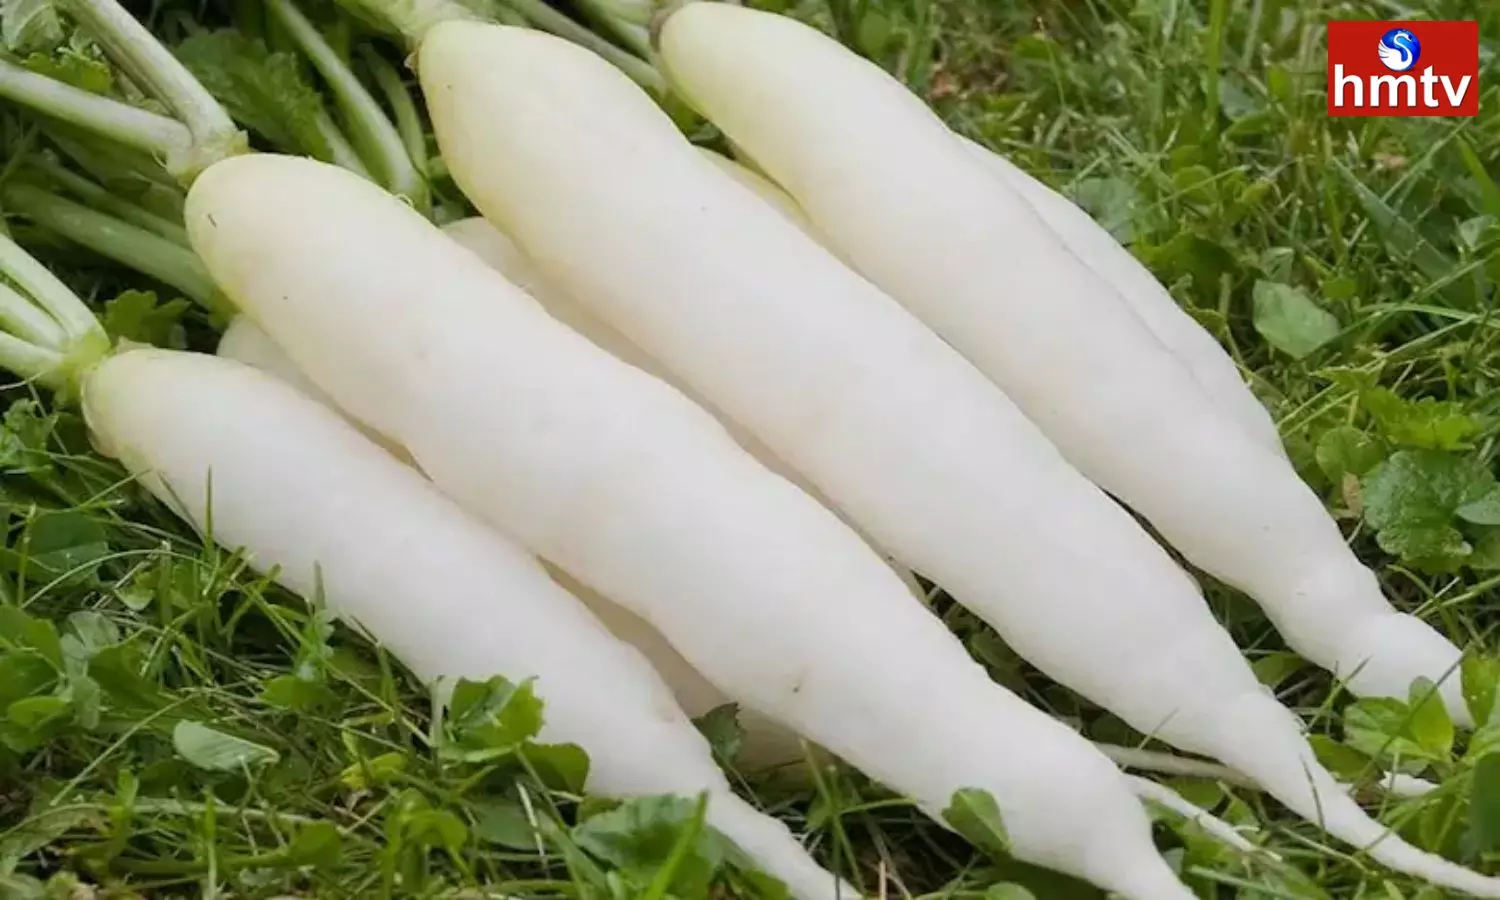 Know the Health Benefits of Eating Radish in Summer